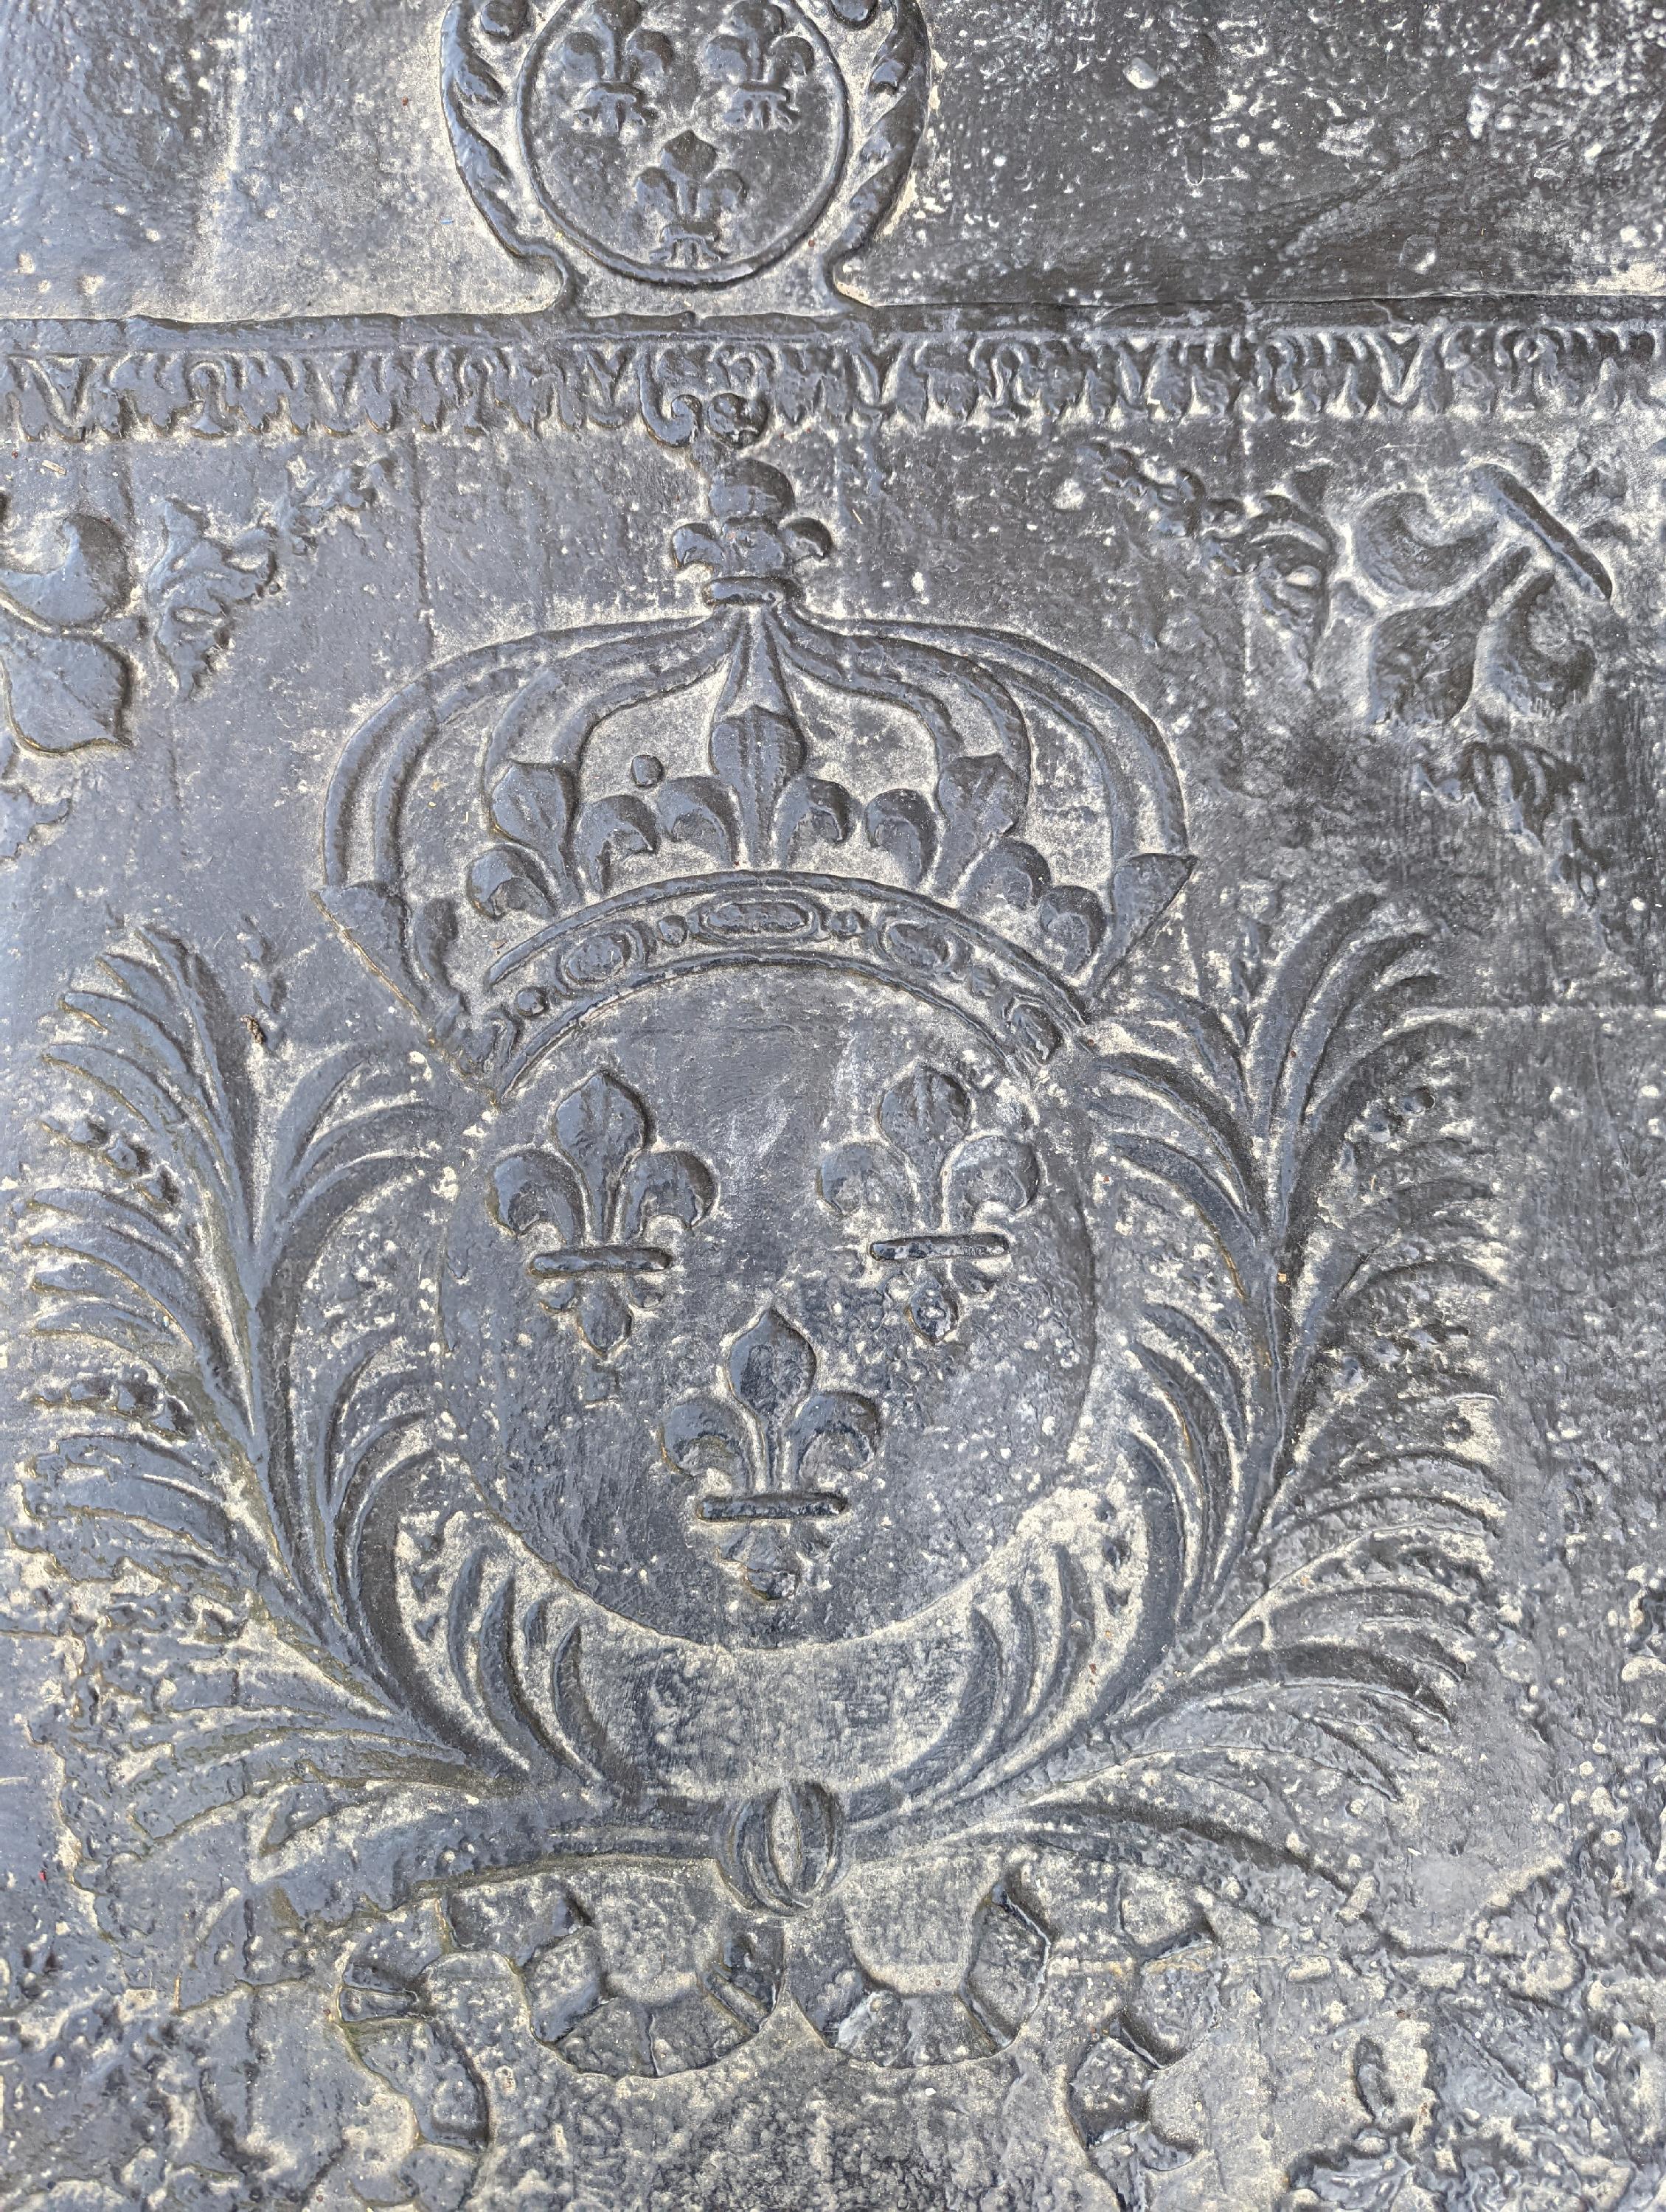 Antique cast iron fireback with the French coat of arms 18th century.